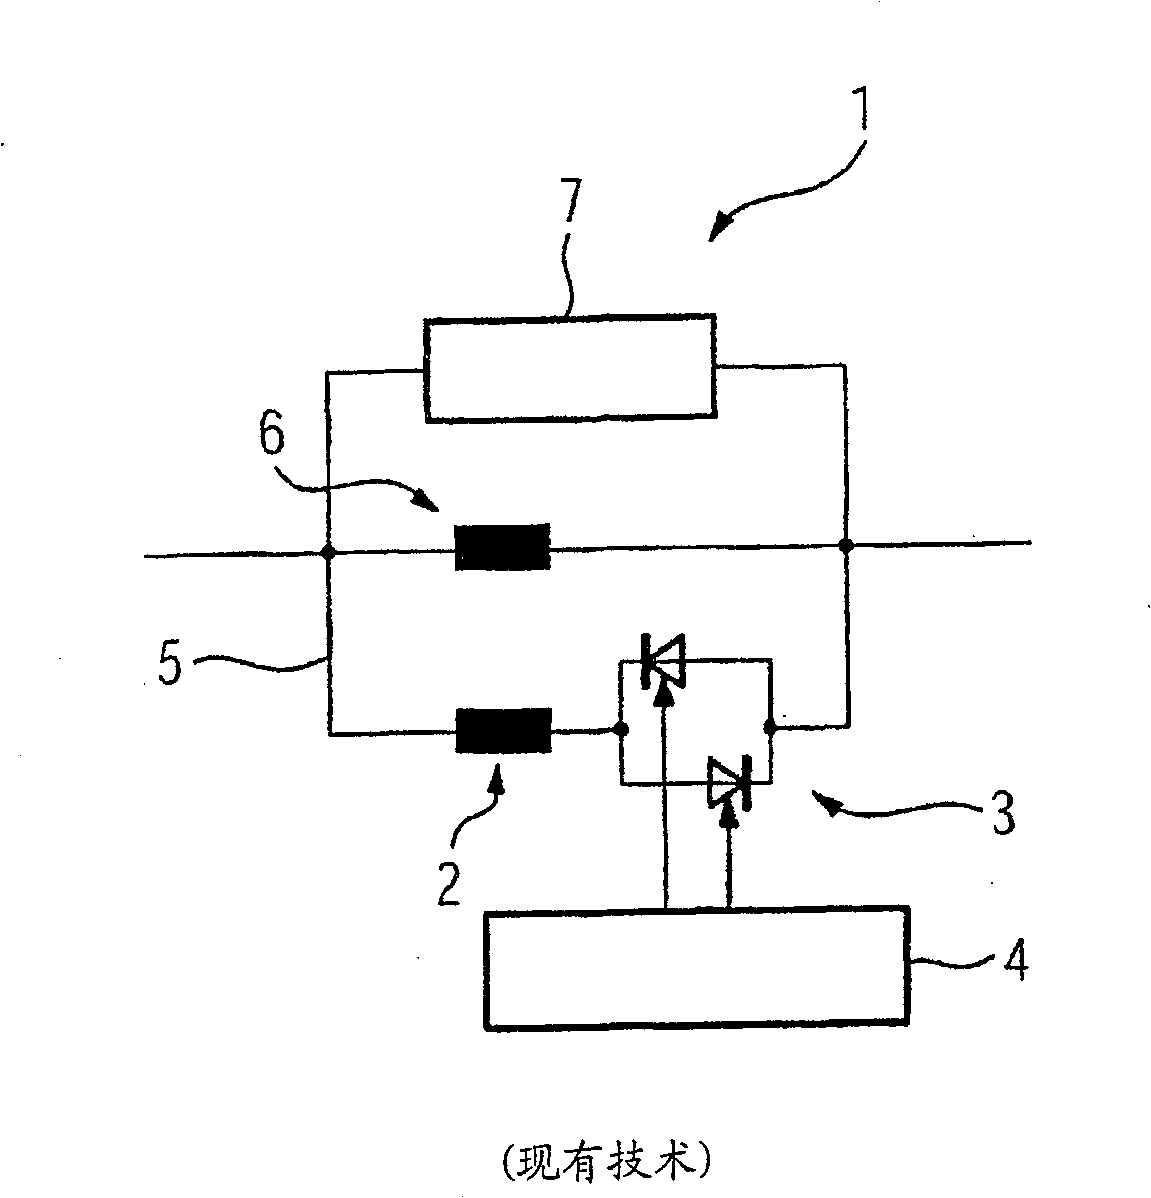 Device for adjusting the impedance of a high voltage line supplying an alternating current